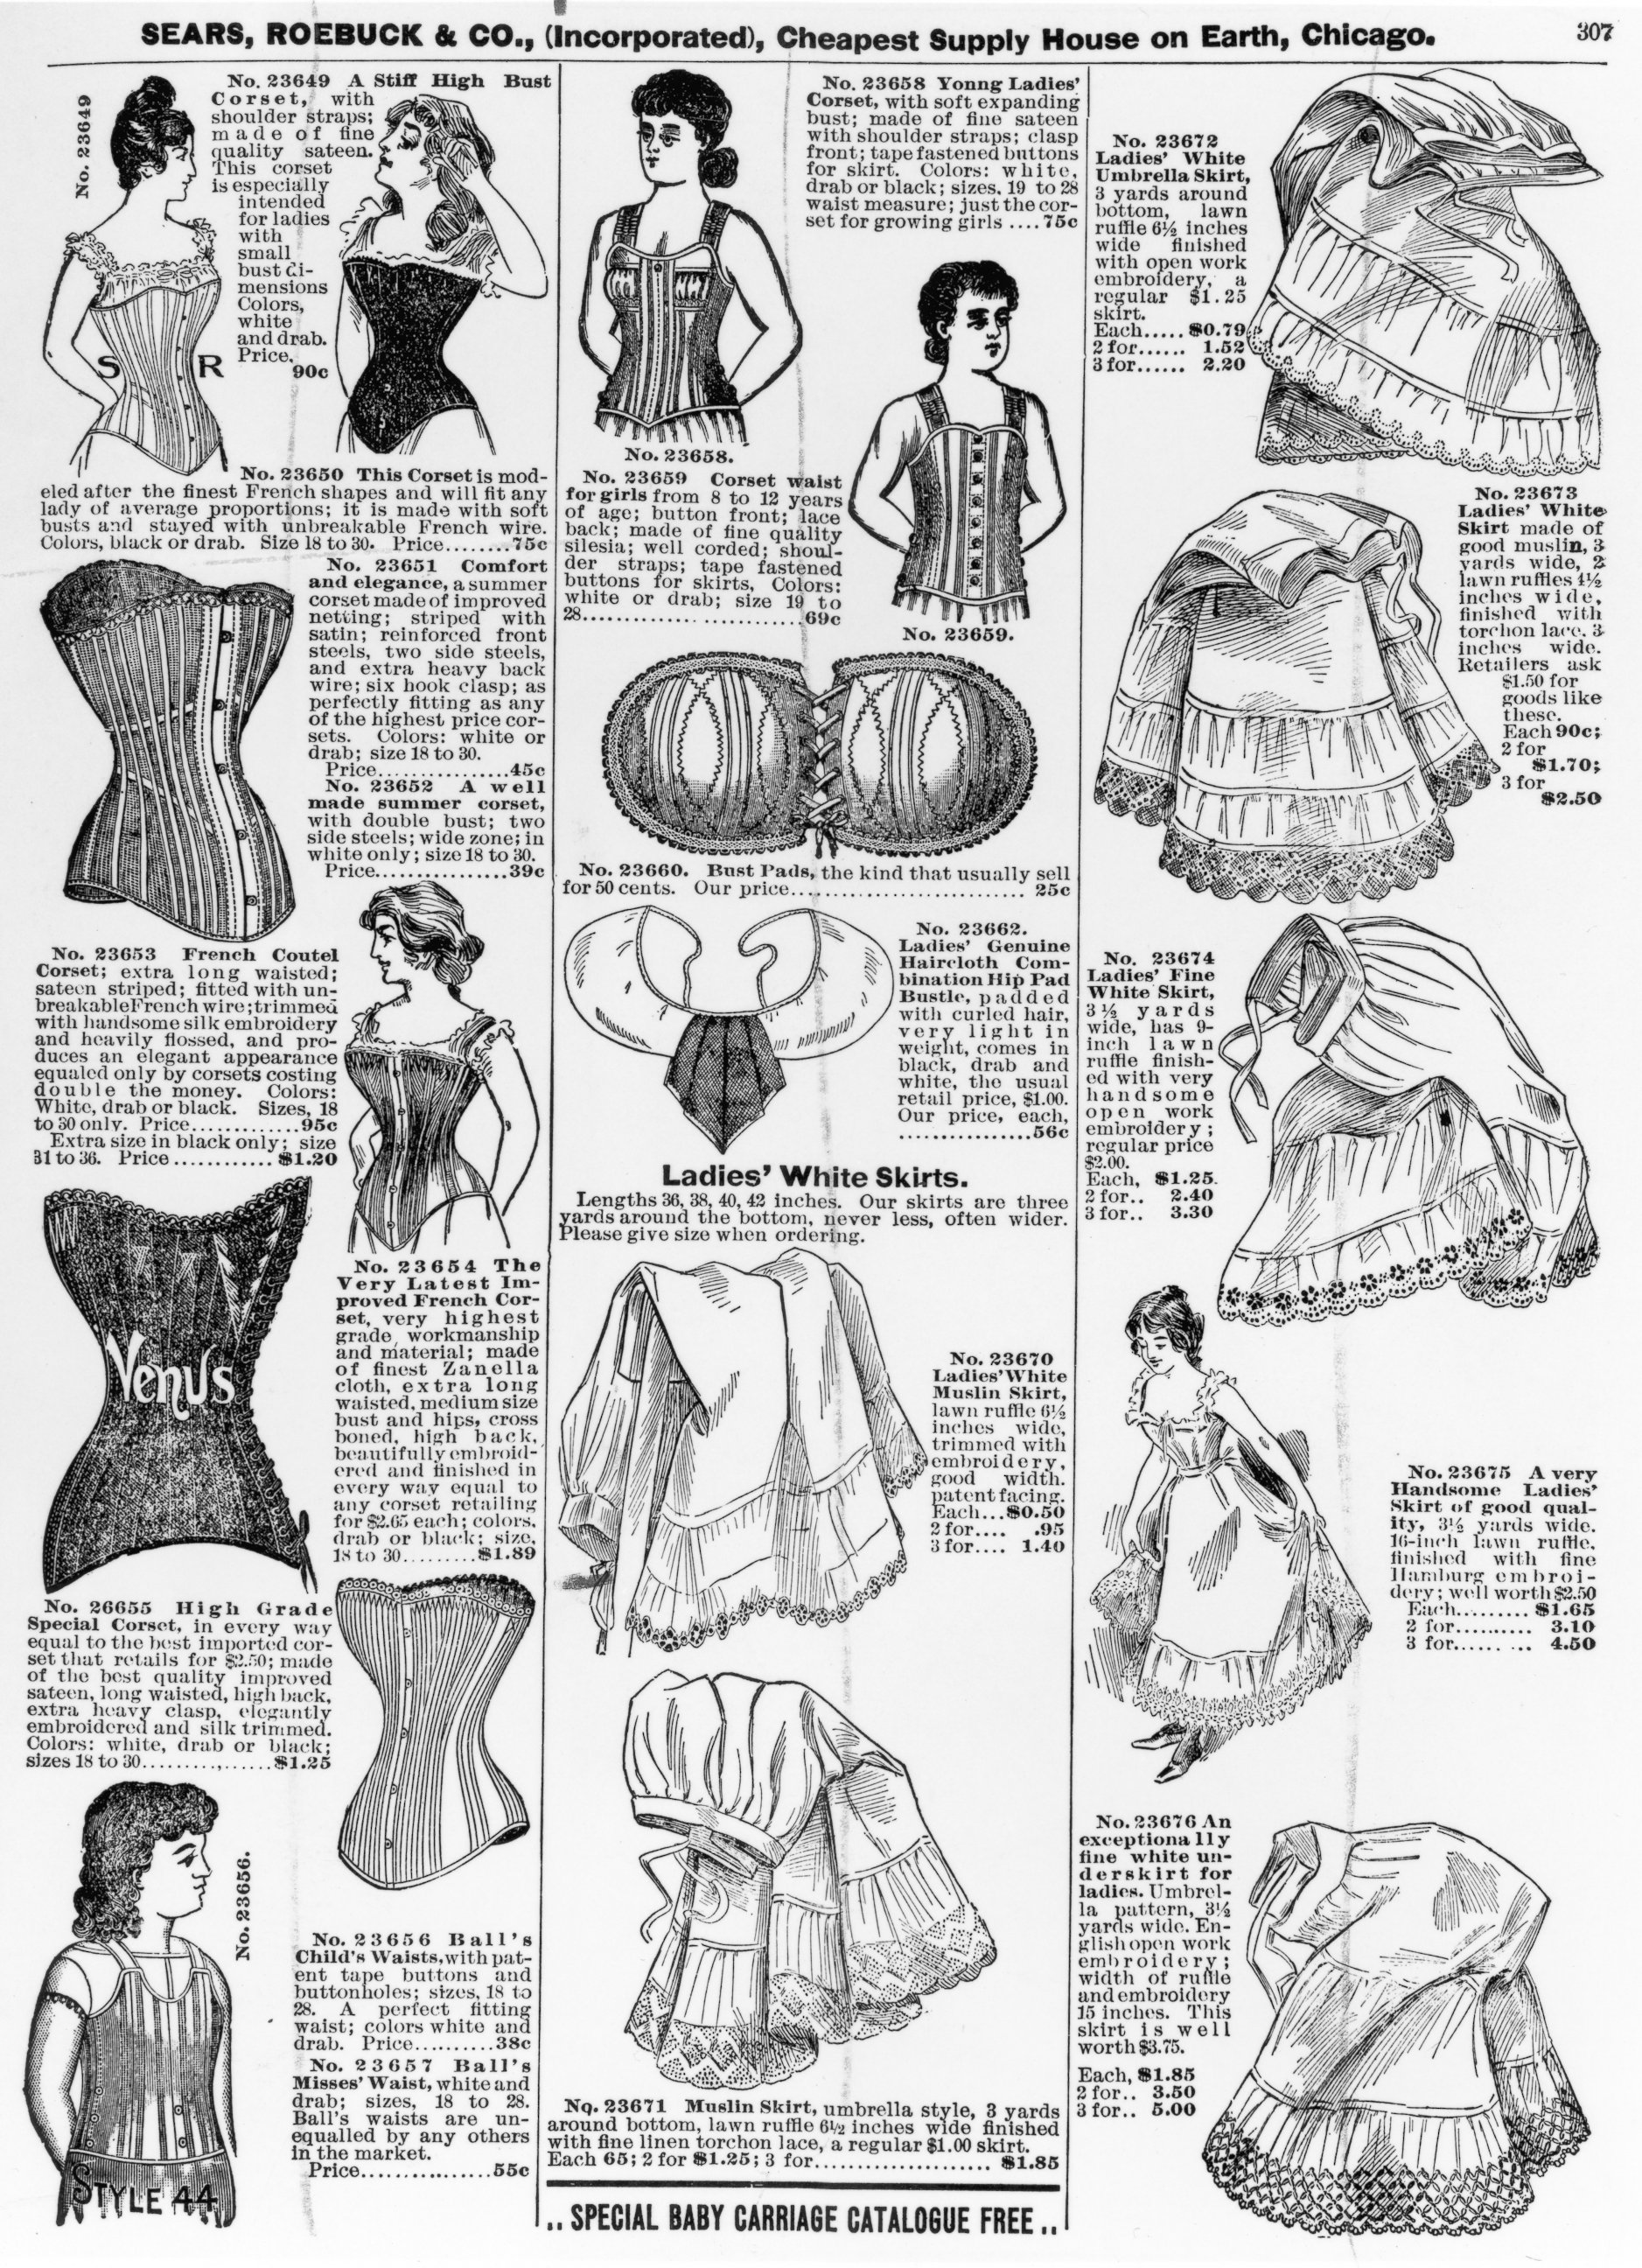 PHOTO: An advertisement for ladies corsets and underskirts by Sears, Roebuck & Co., circa 1897.